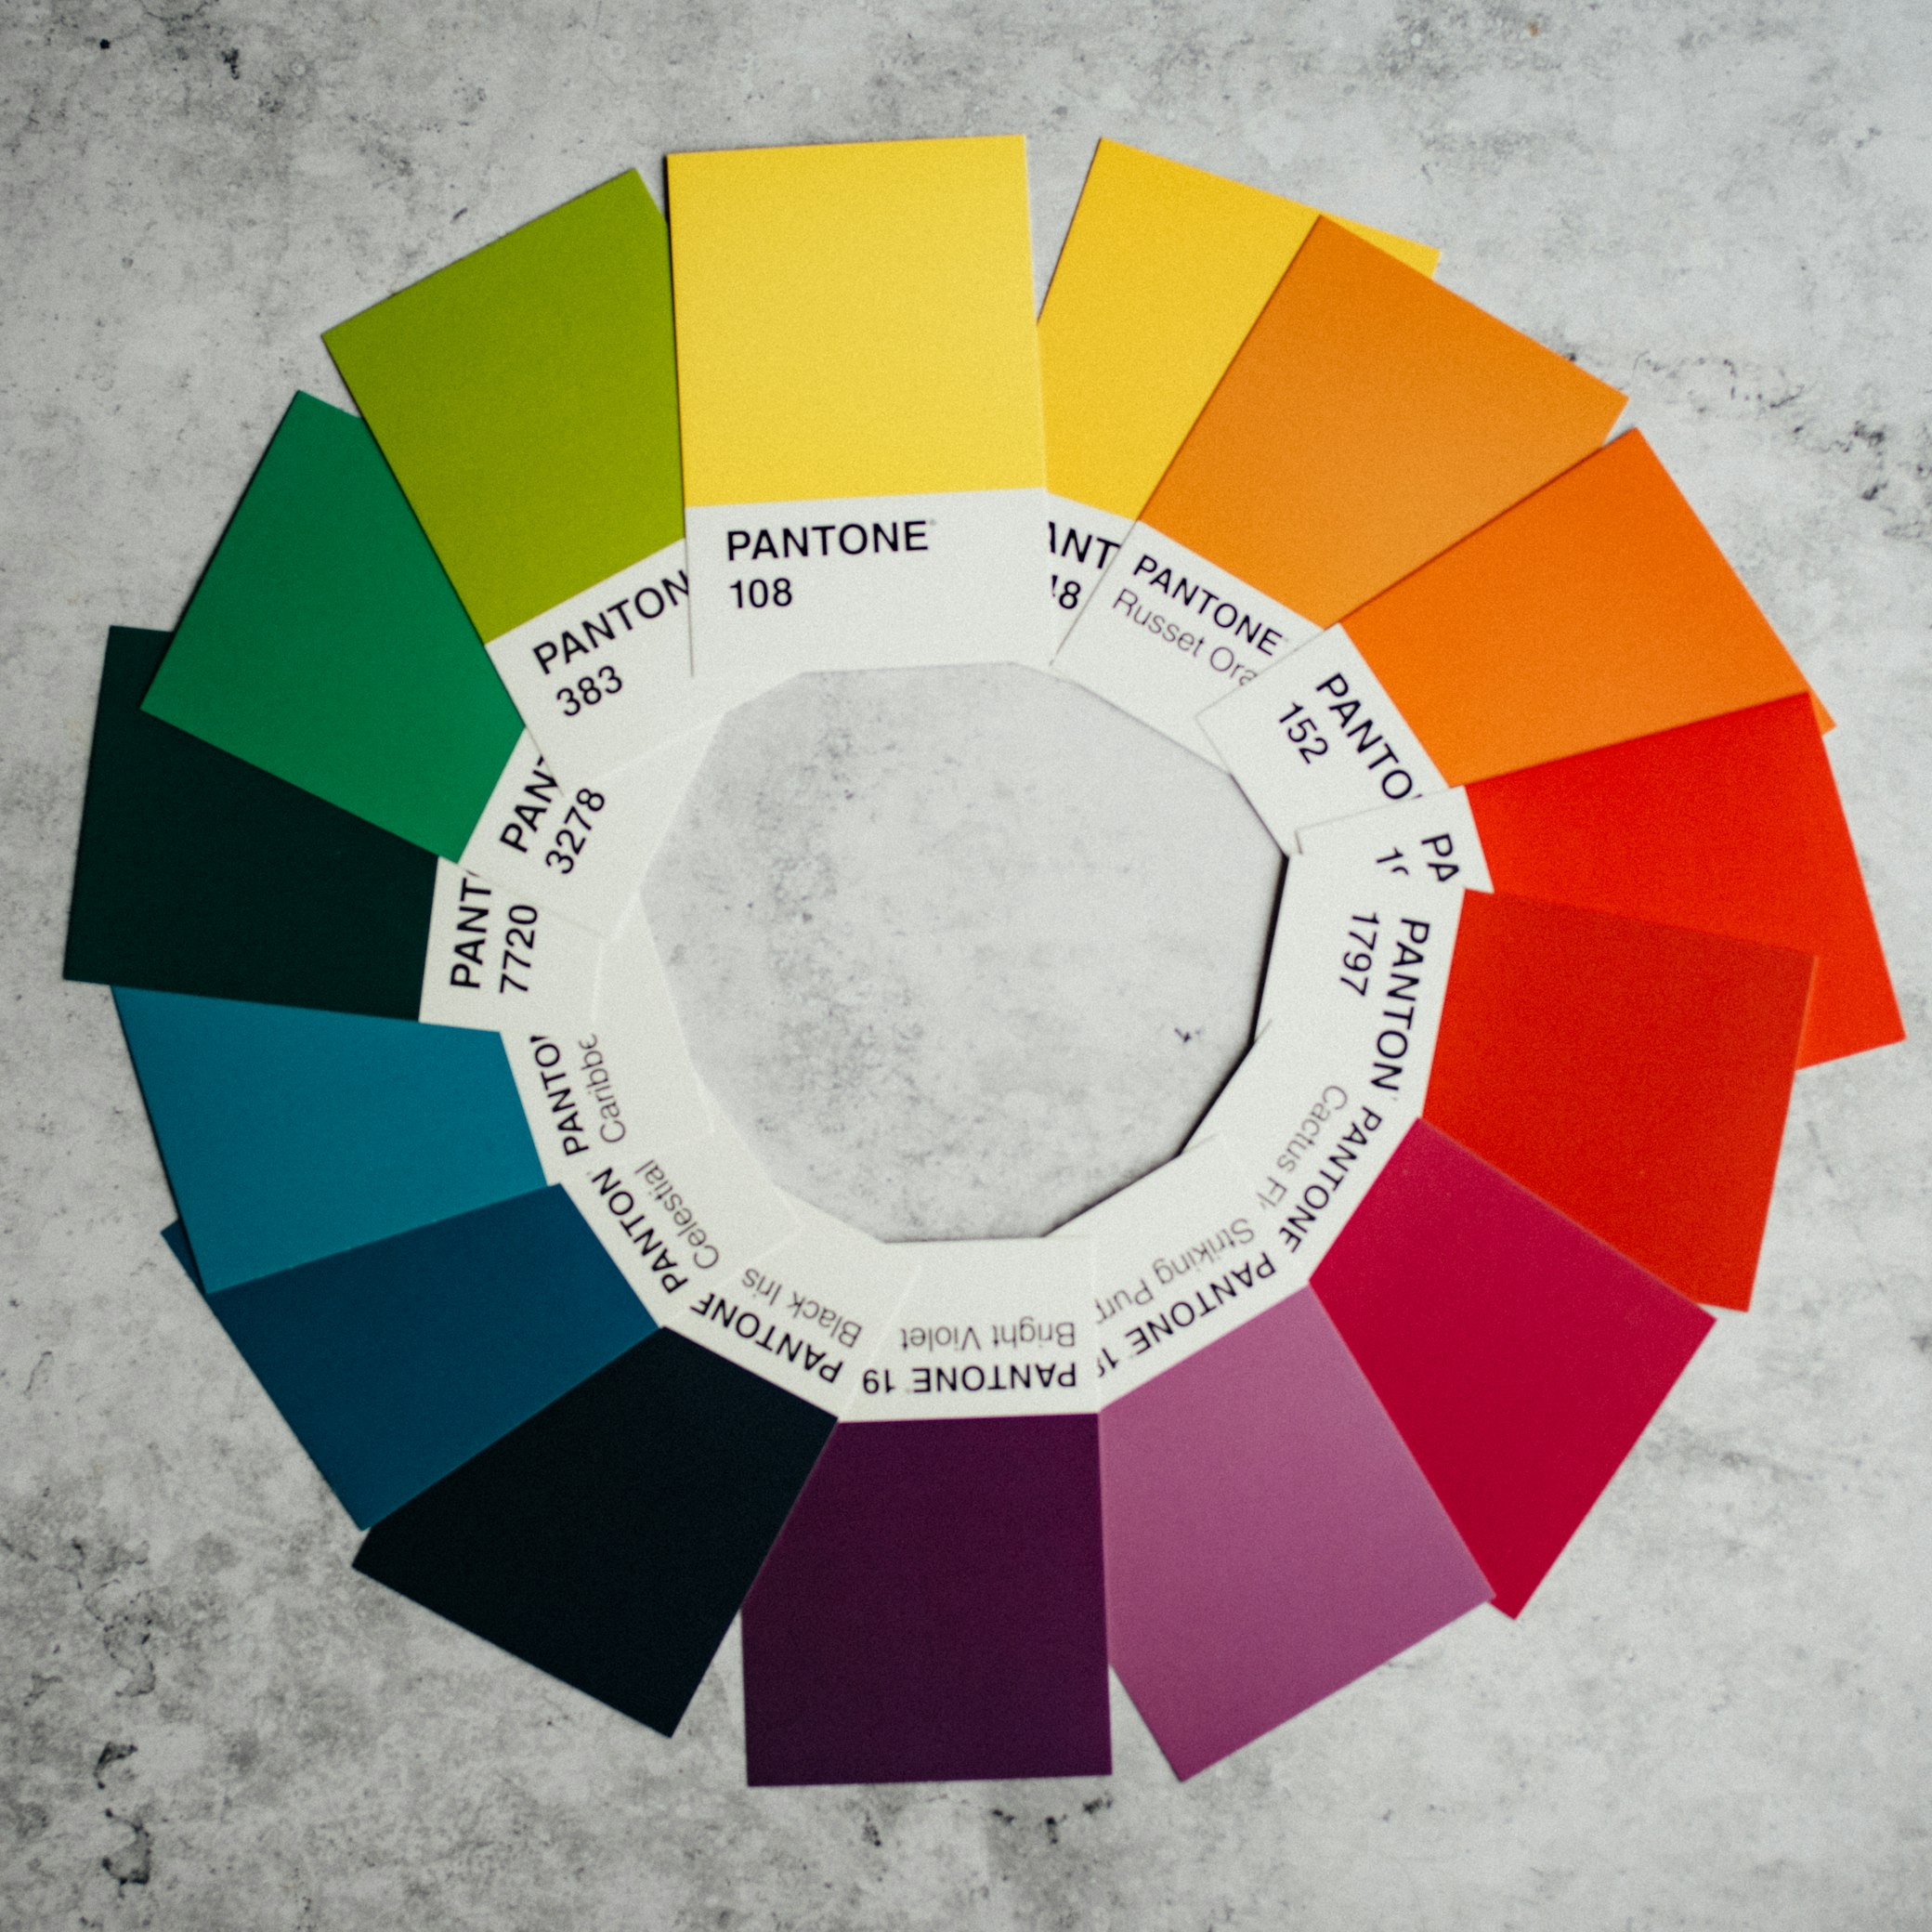 A variety of different color swatches in a circle.